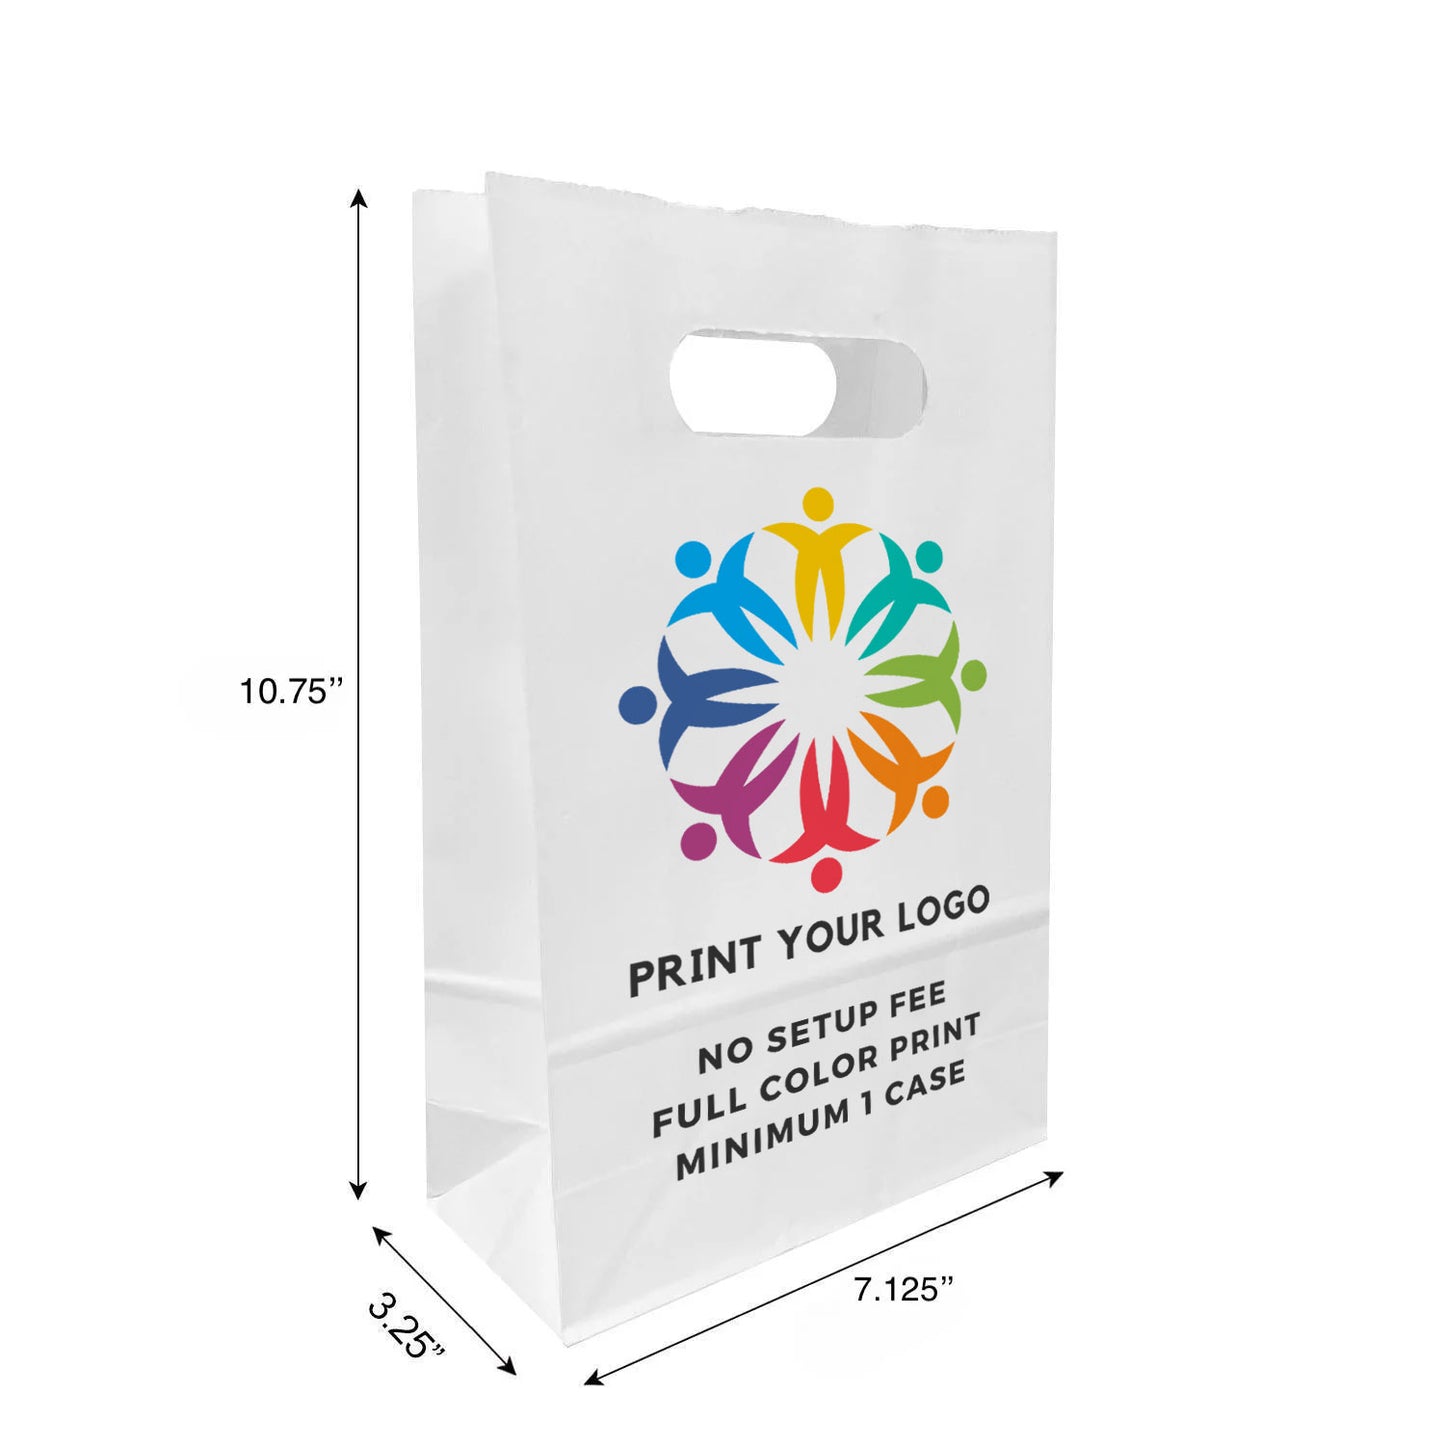 250pcs Snack 7.125x3.25x10.75 inches White Paper Bags Die Cut Handles; Full Color Custom Print, Printed in Canda